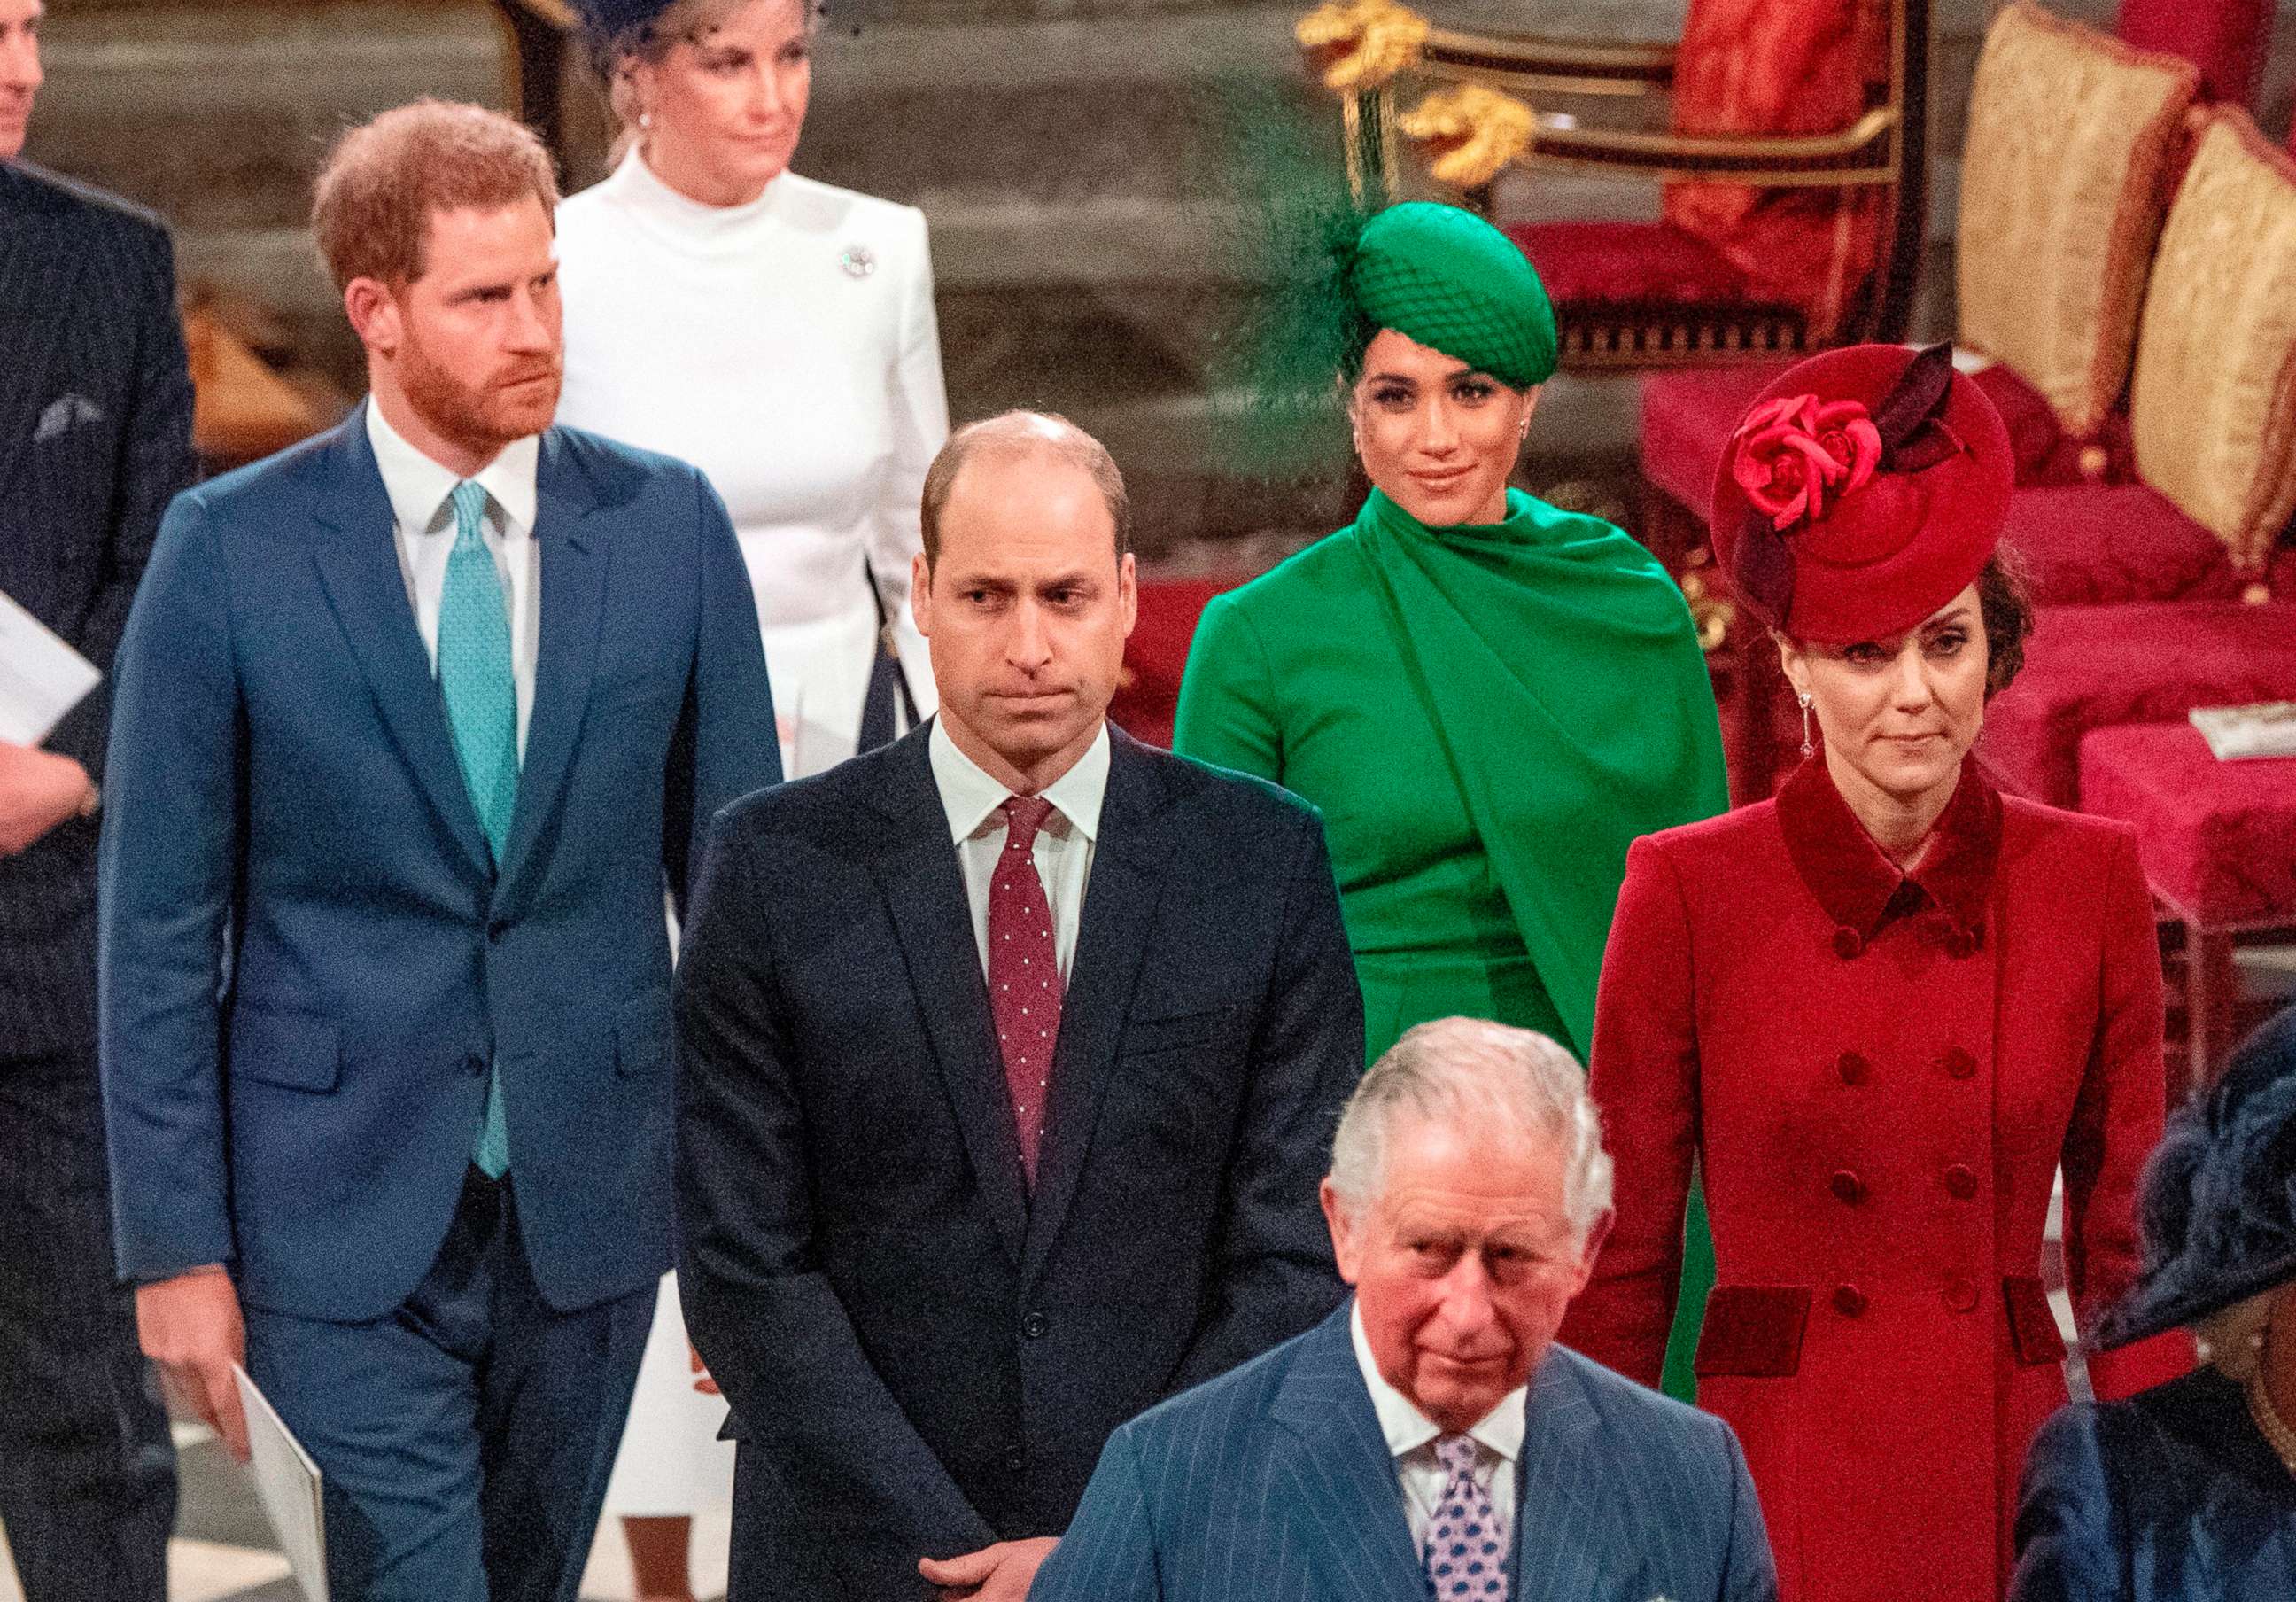 PHOTO: Members of Britain's royal family depart Westminster Abbey after attending the annual Commonwealth Service in London on March 9, 2020.